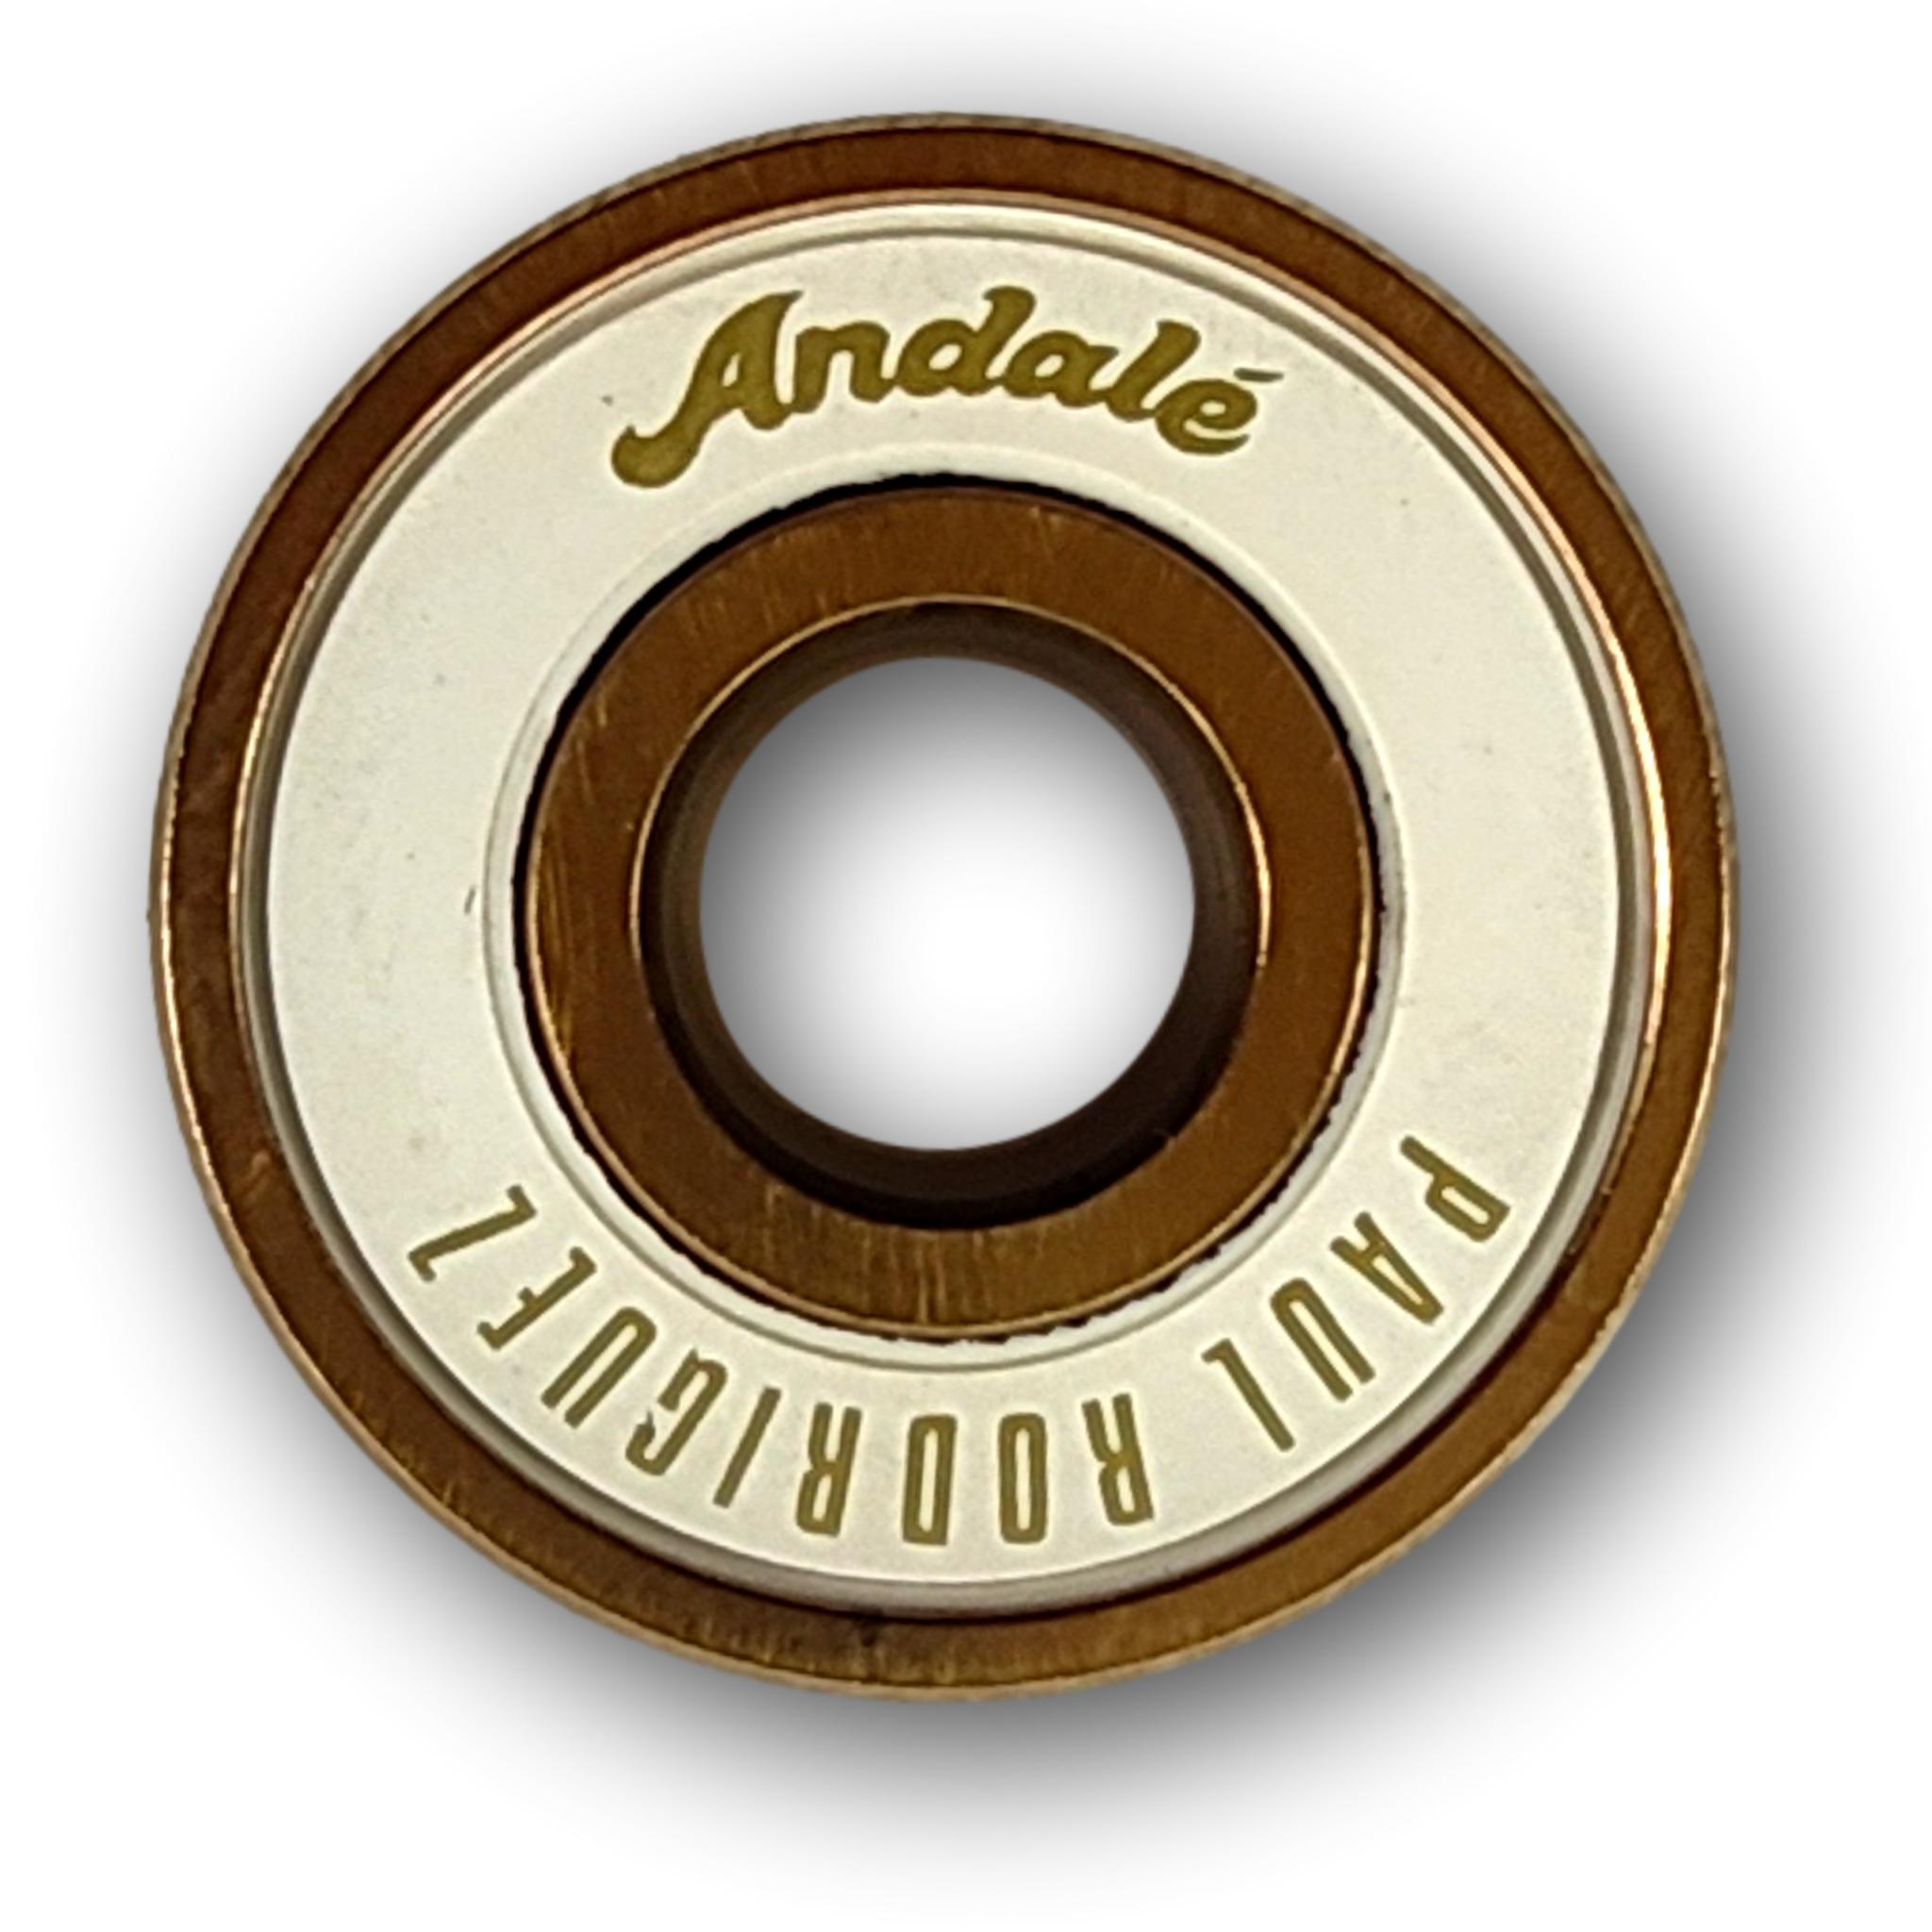 ANDALE PAUL RODRIGUEZ PRO RATED BEARINGS